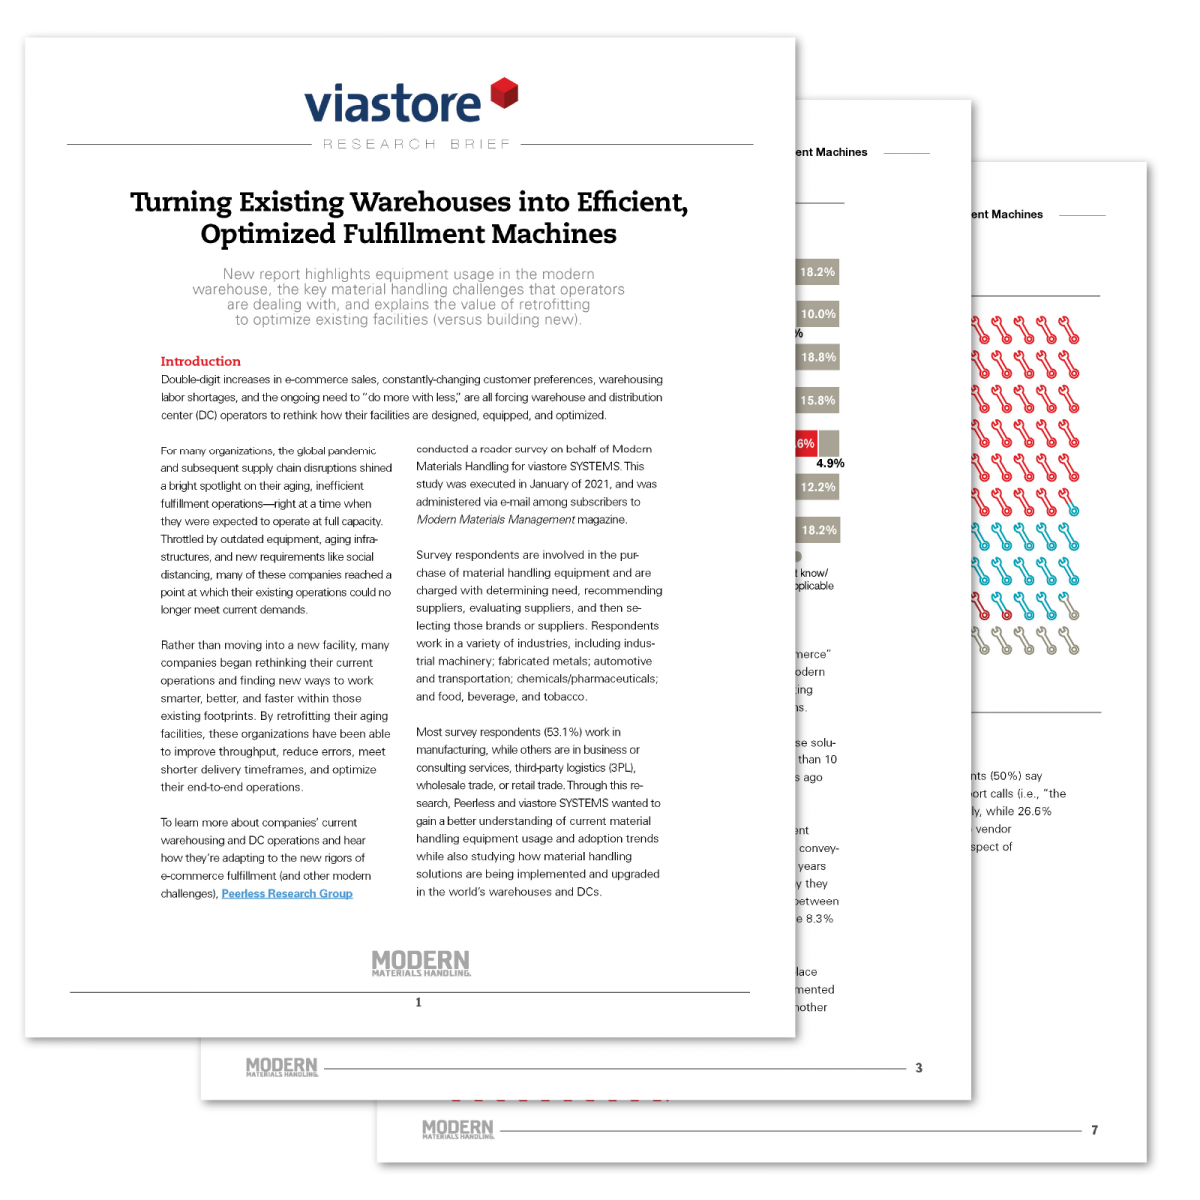 viastore and MMH Research Brief